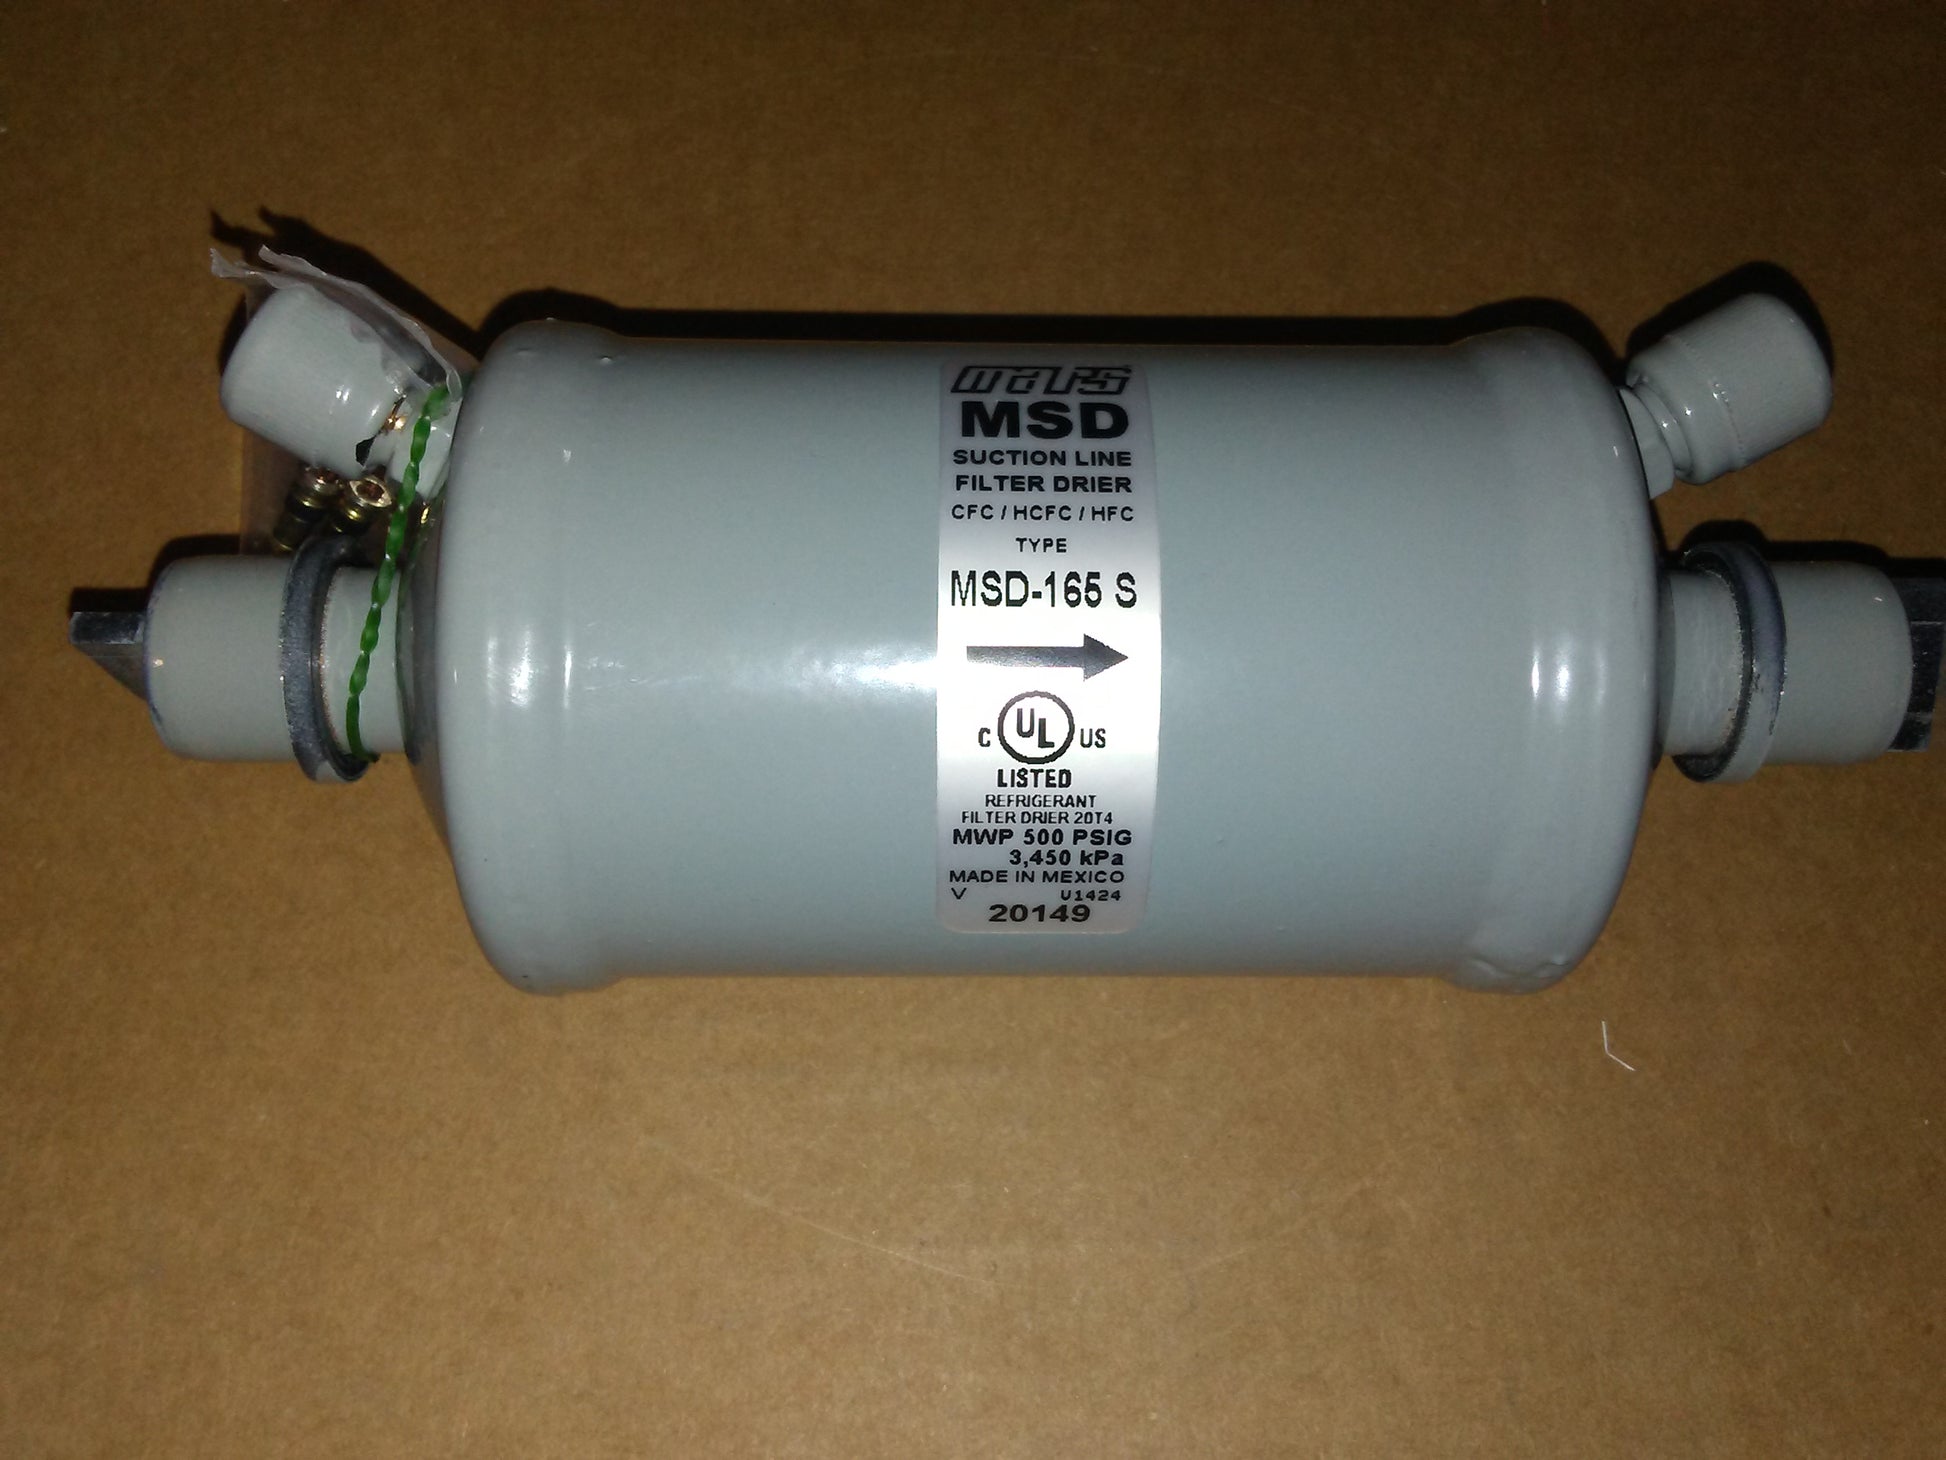 16 CUBIC INCH 3/8" SWEAT SUCTION LINE FILTER-DRIER